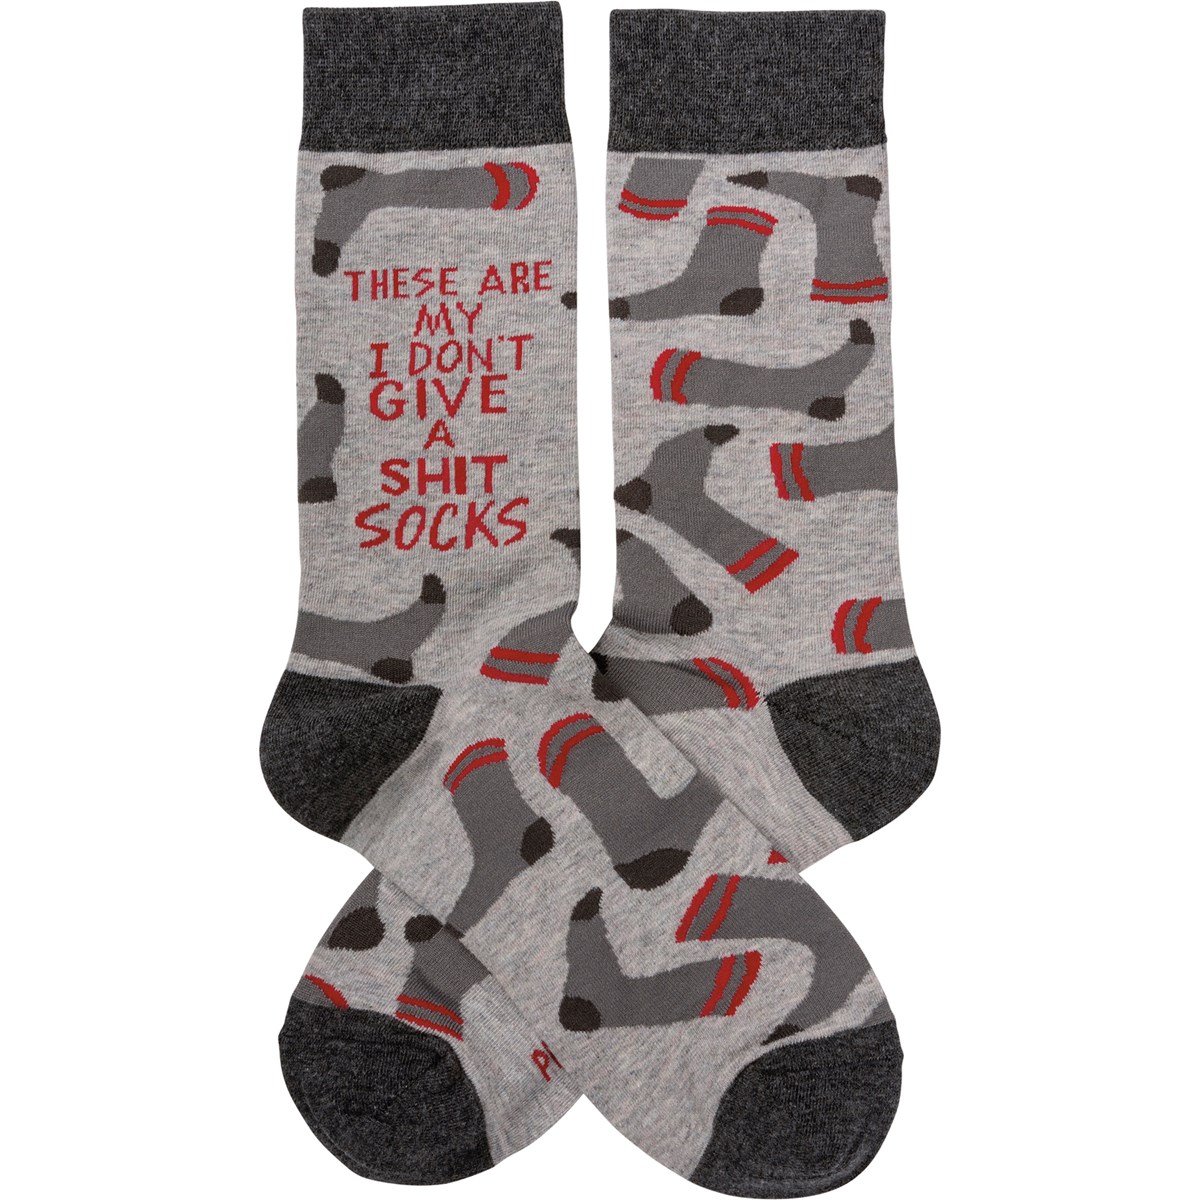 Socks - These Are My Don't Give A Shit Socks - One Size Fits Most - Cotton, Nylon, Spandex